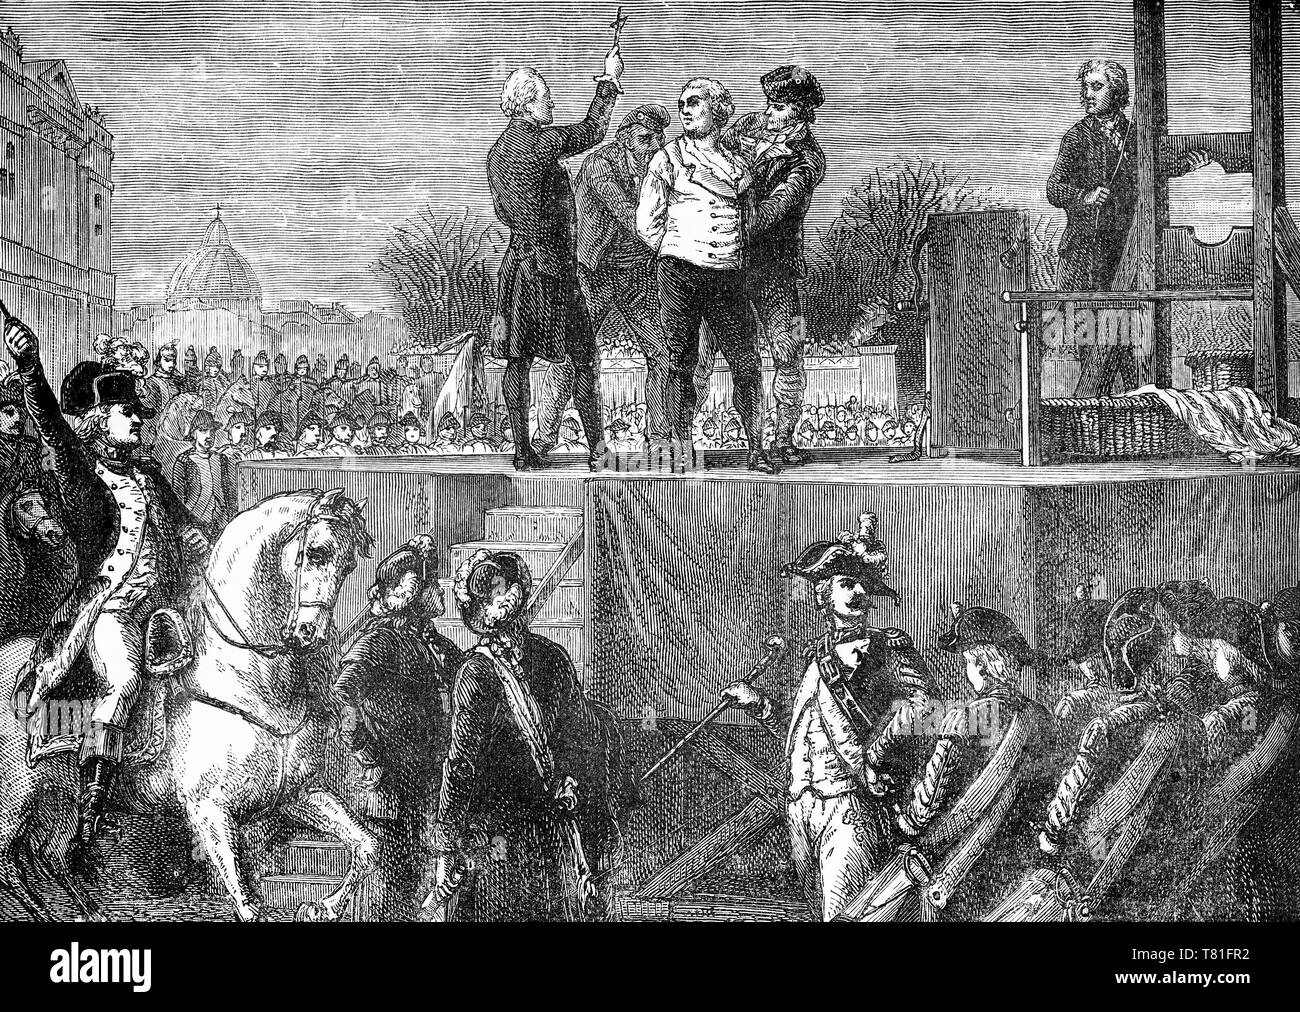 Engraving of Louis XVI on the scaffold during the French Revolution. Stock Photo